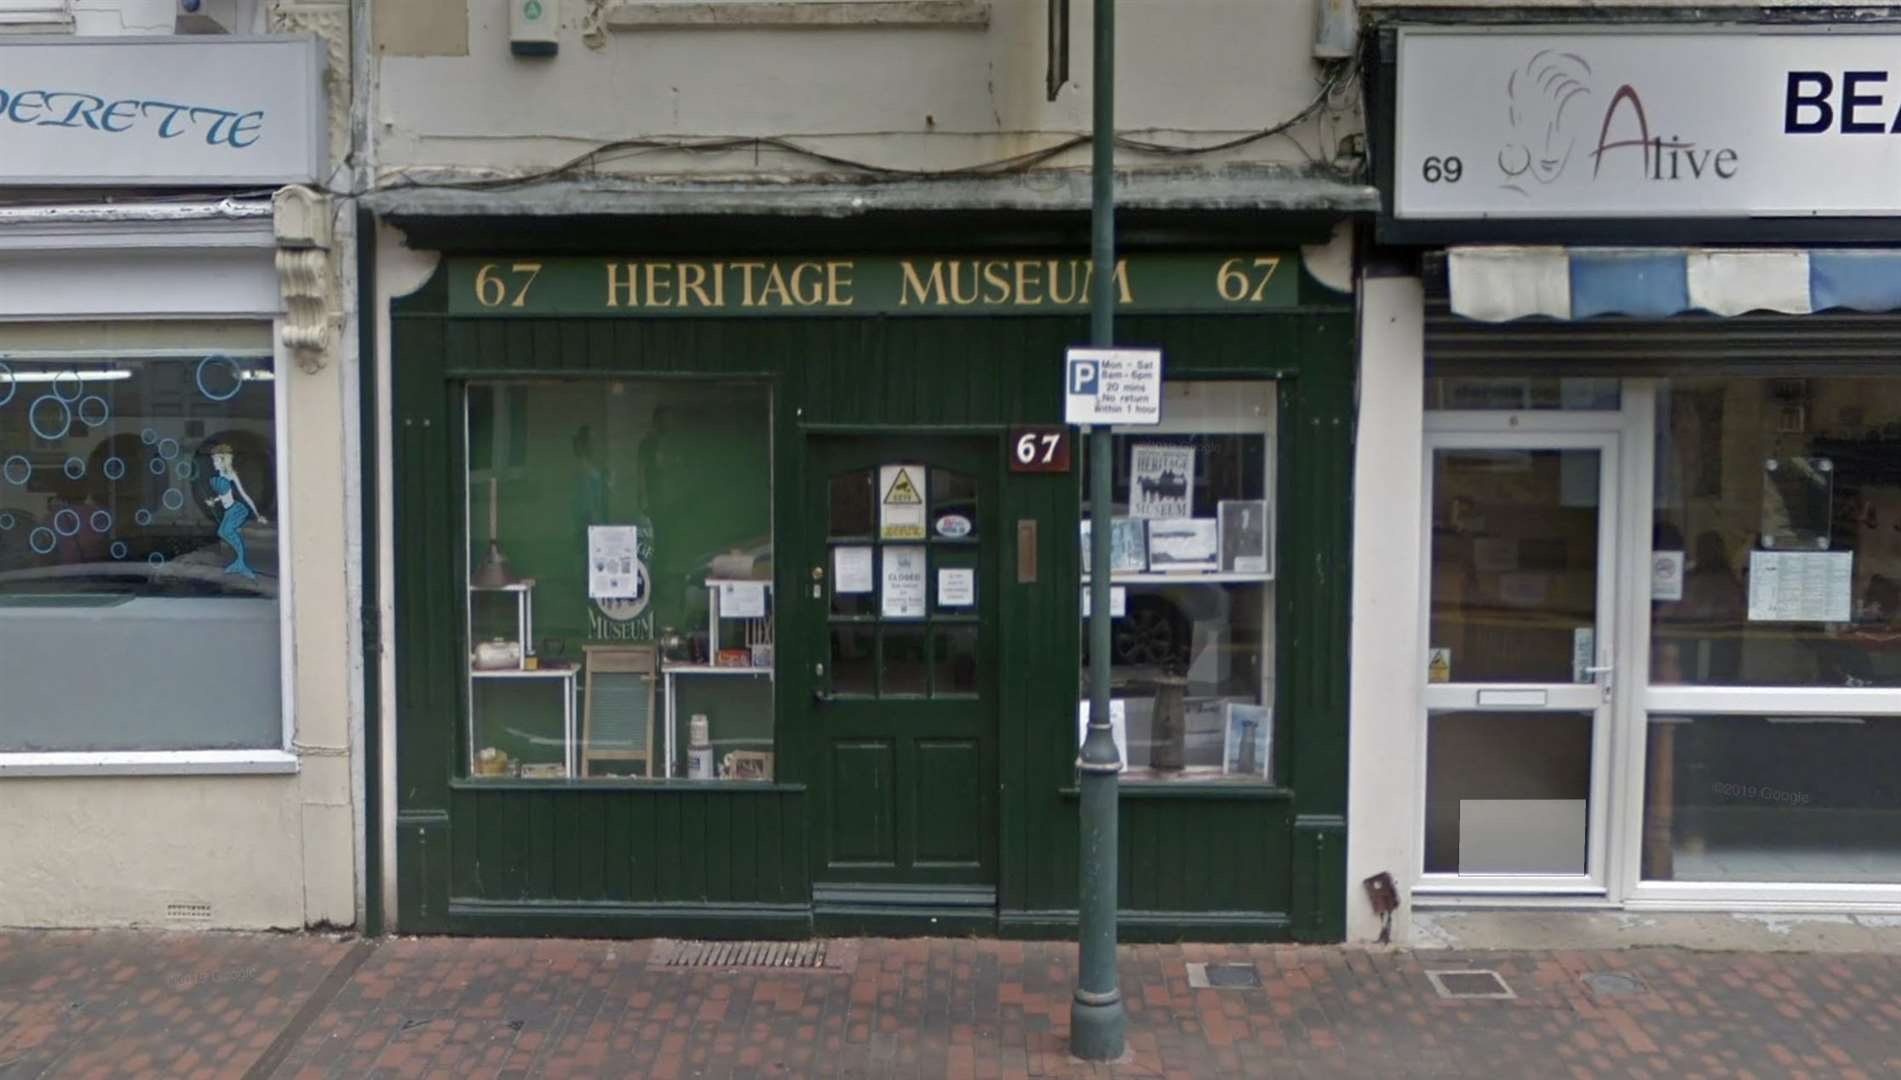 Sittingbourne Heritage Museum, located in East Street. Picture: Google Maps